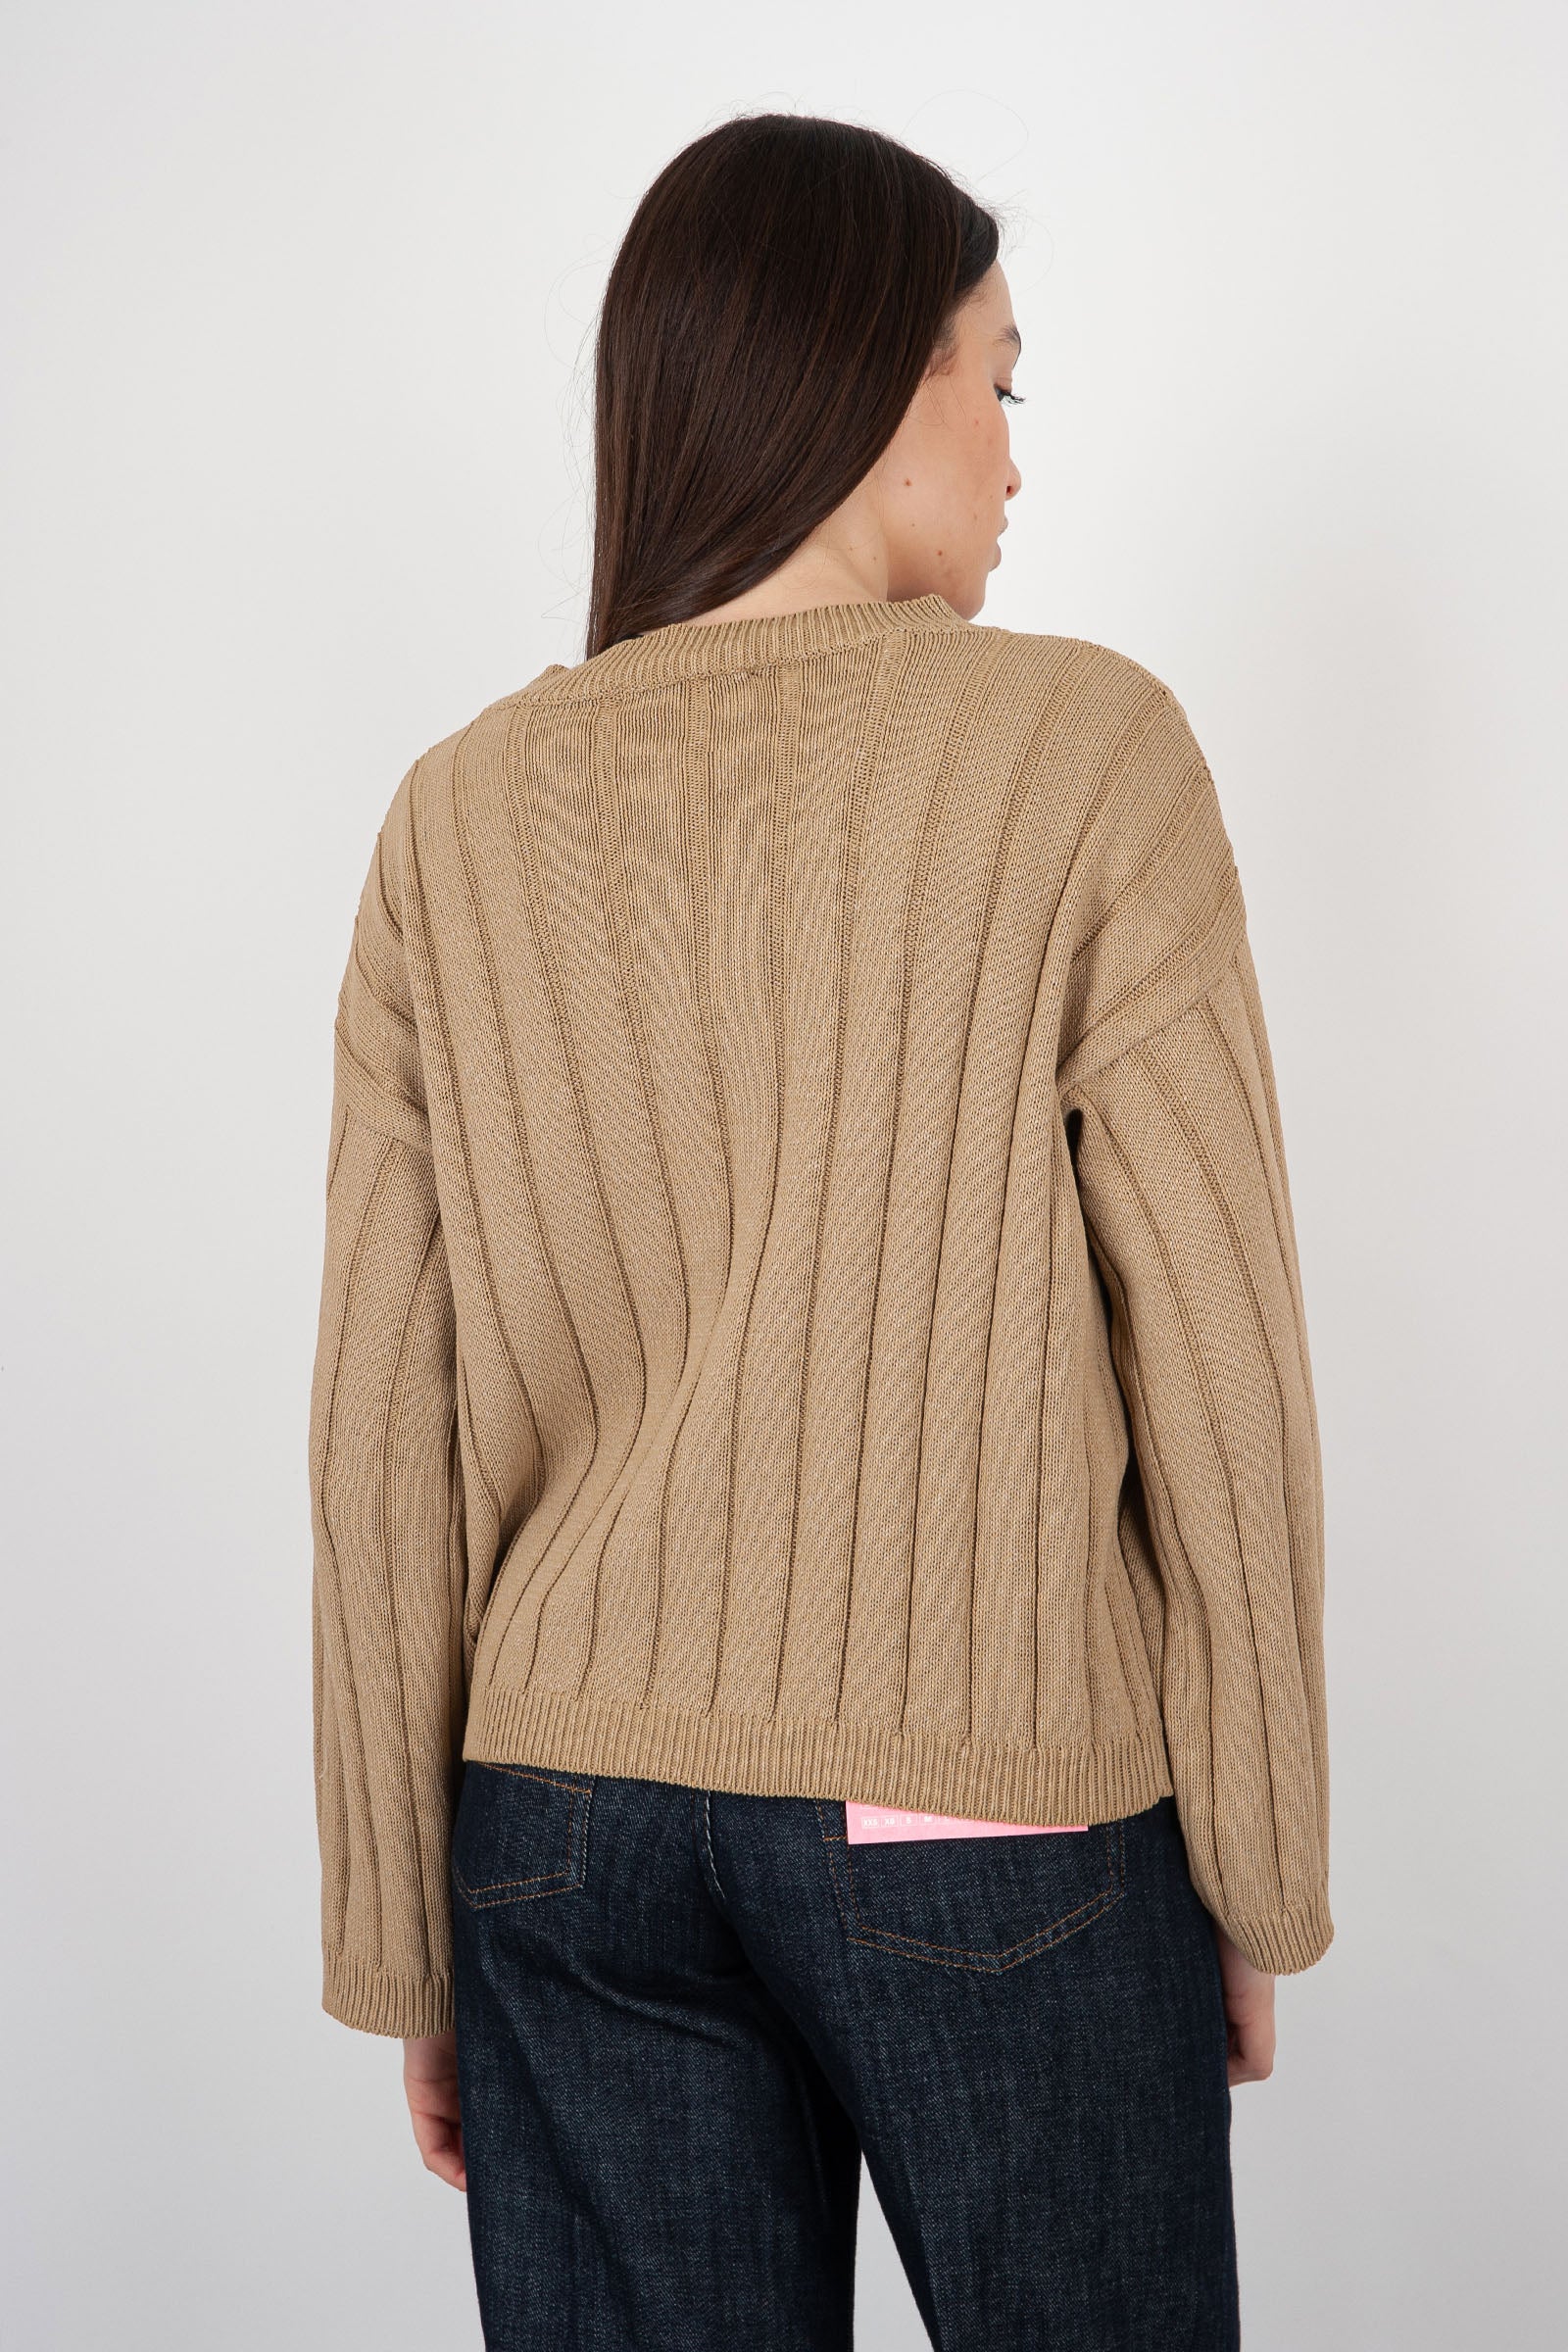 Grifoni Ribbed Sand Knit in Cotton/Polyamide - 4